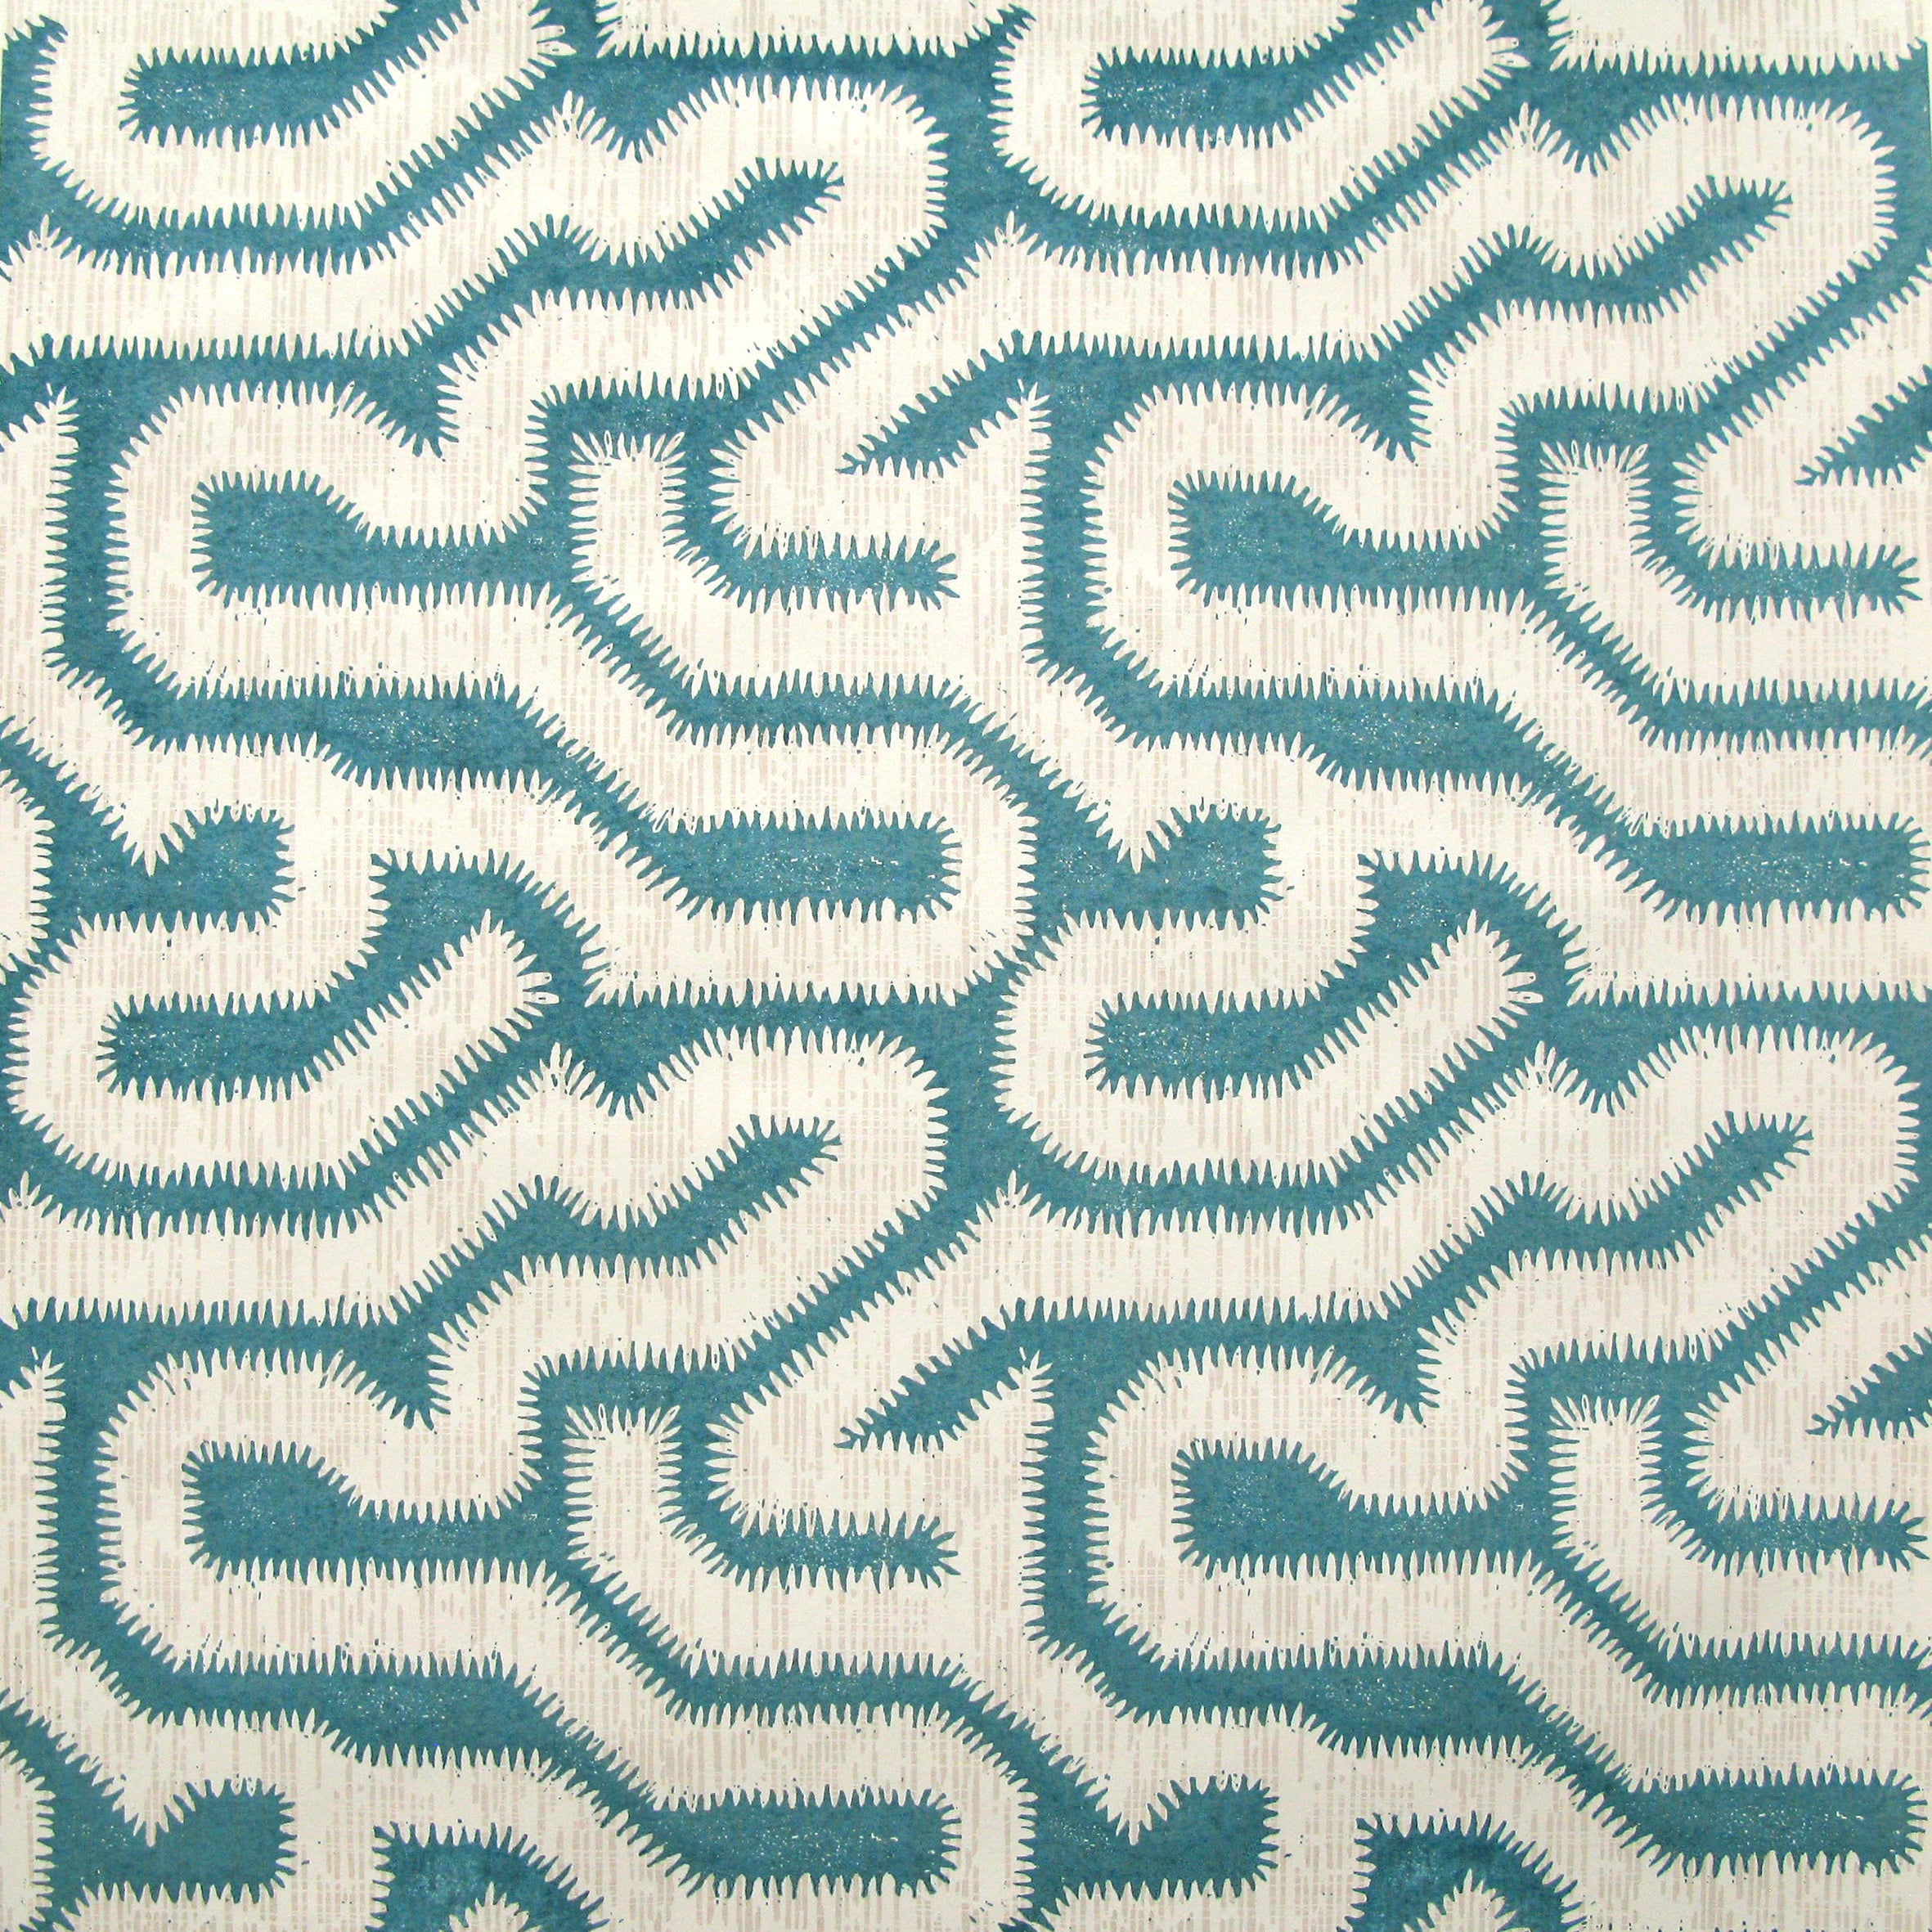 Detail of wallpaper in a playful meandering print in cream on a turquoise field.